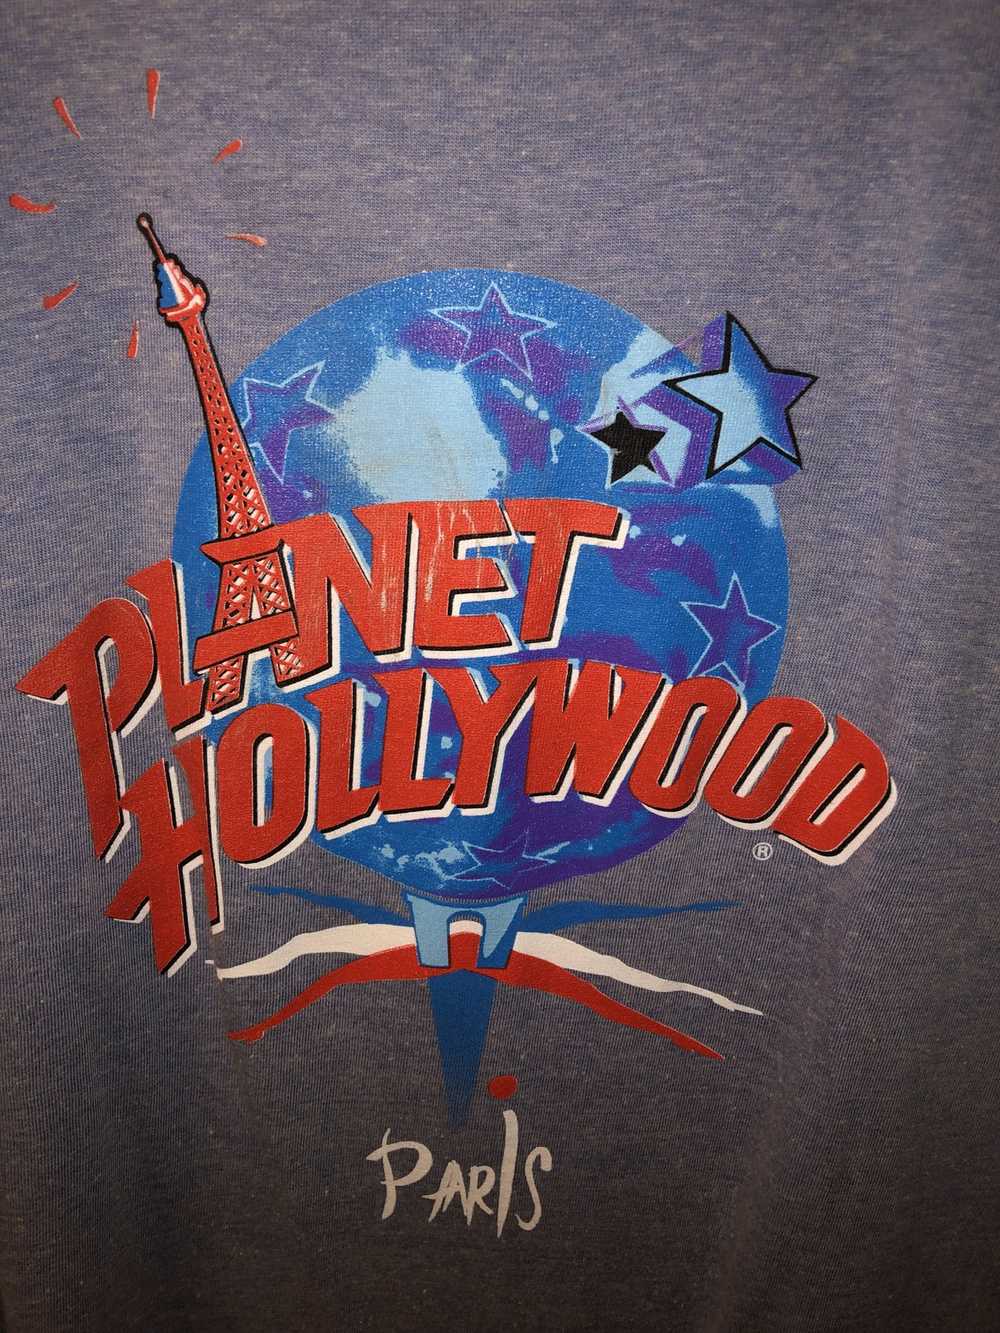 Planet Hollywood Vintage Planet Hollywood T-Shirt - image 3